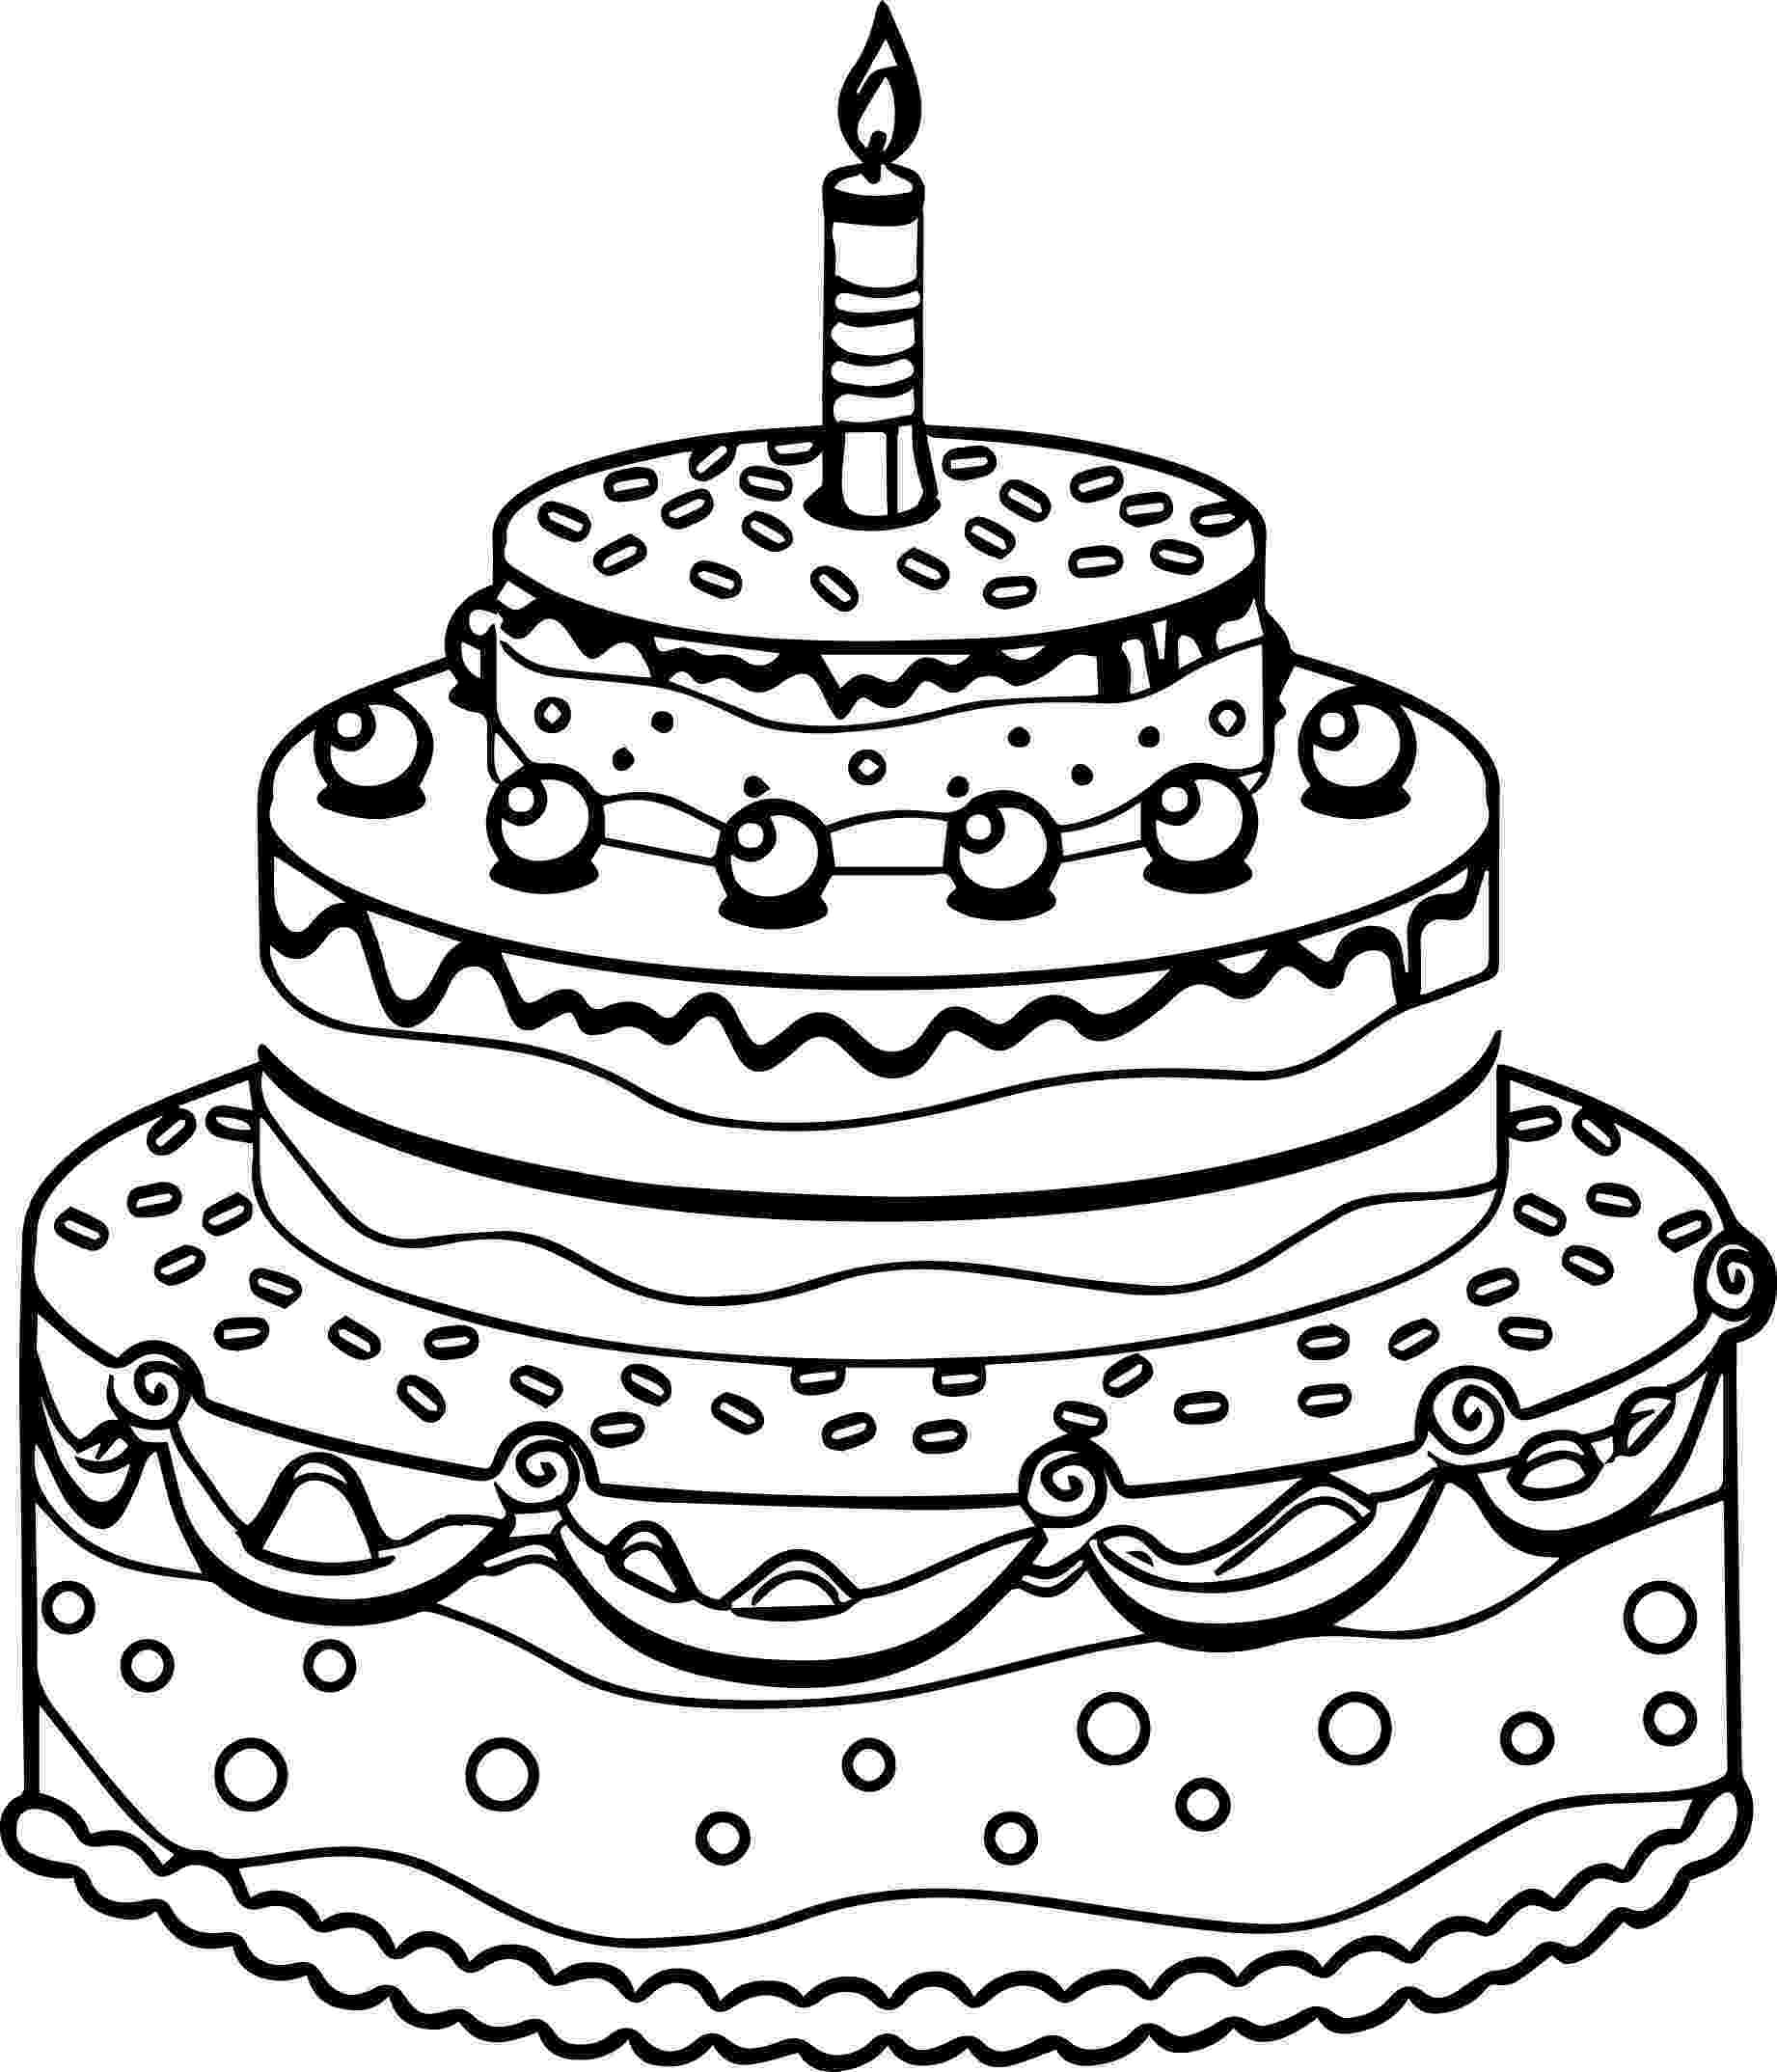 colouring picture cake birthday candle coloring page at getcoloringscom free picture colouring cake 